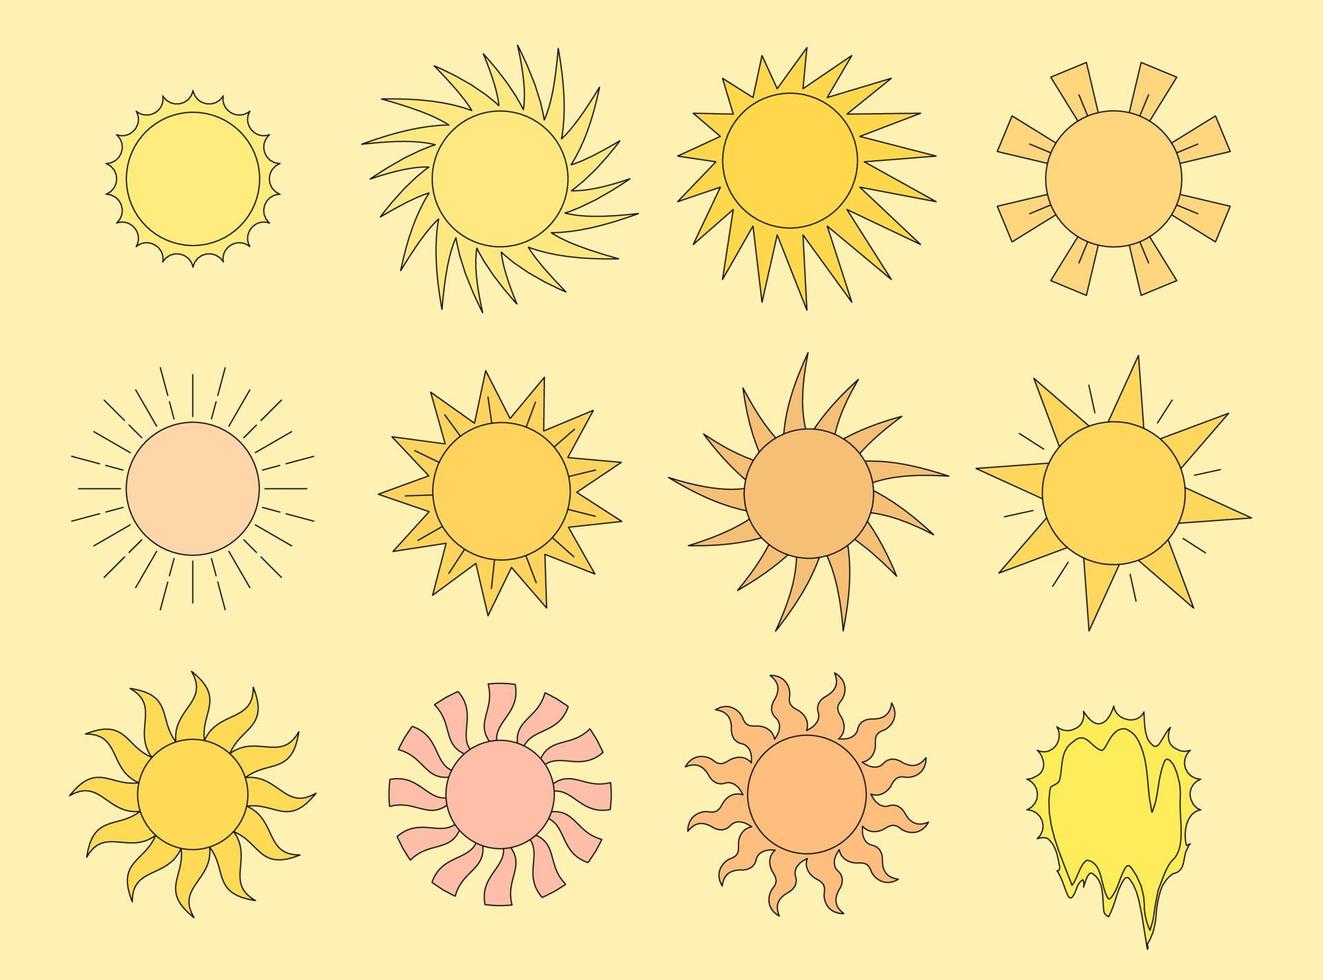 Retro groovy style shiny sun set. Psychedelic hippie old sol collection. Abstract vintage hippy various bright sticker pack. Trendy y2k pop culture or boho design vector eps elements